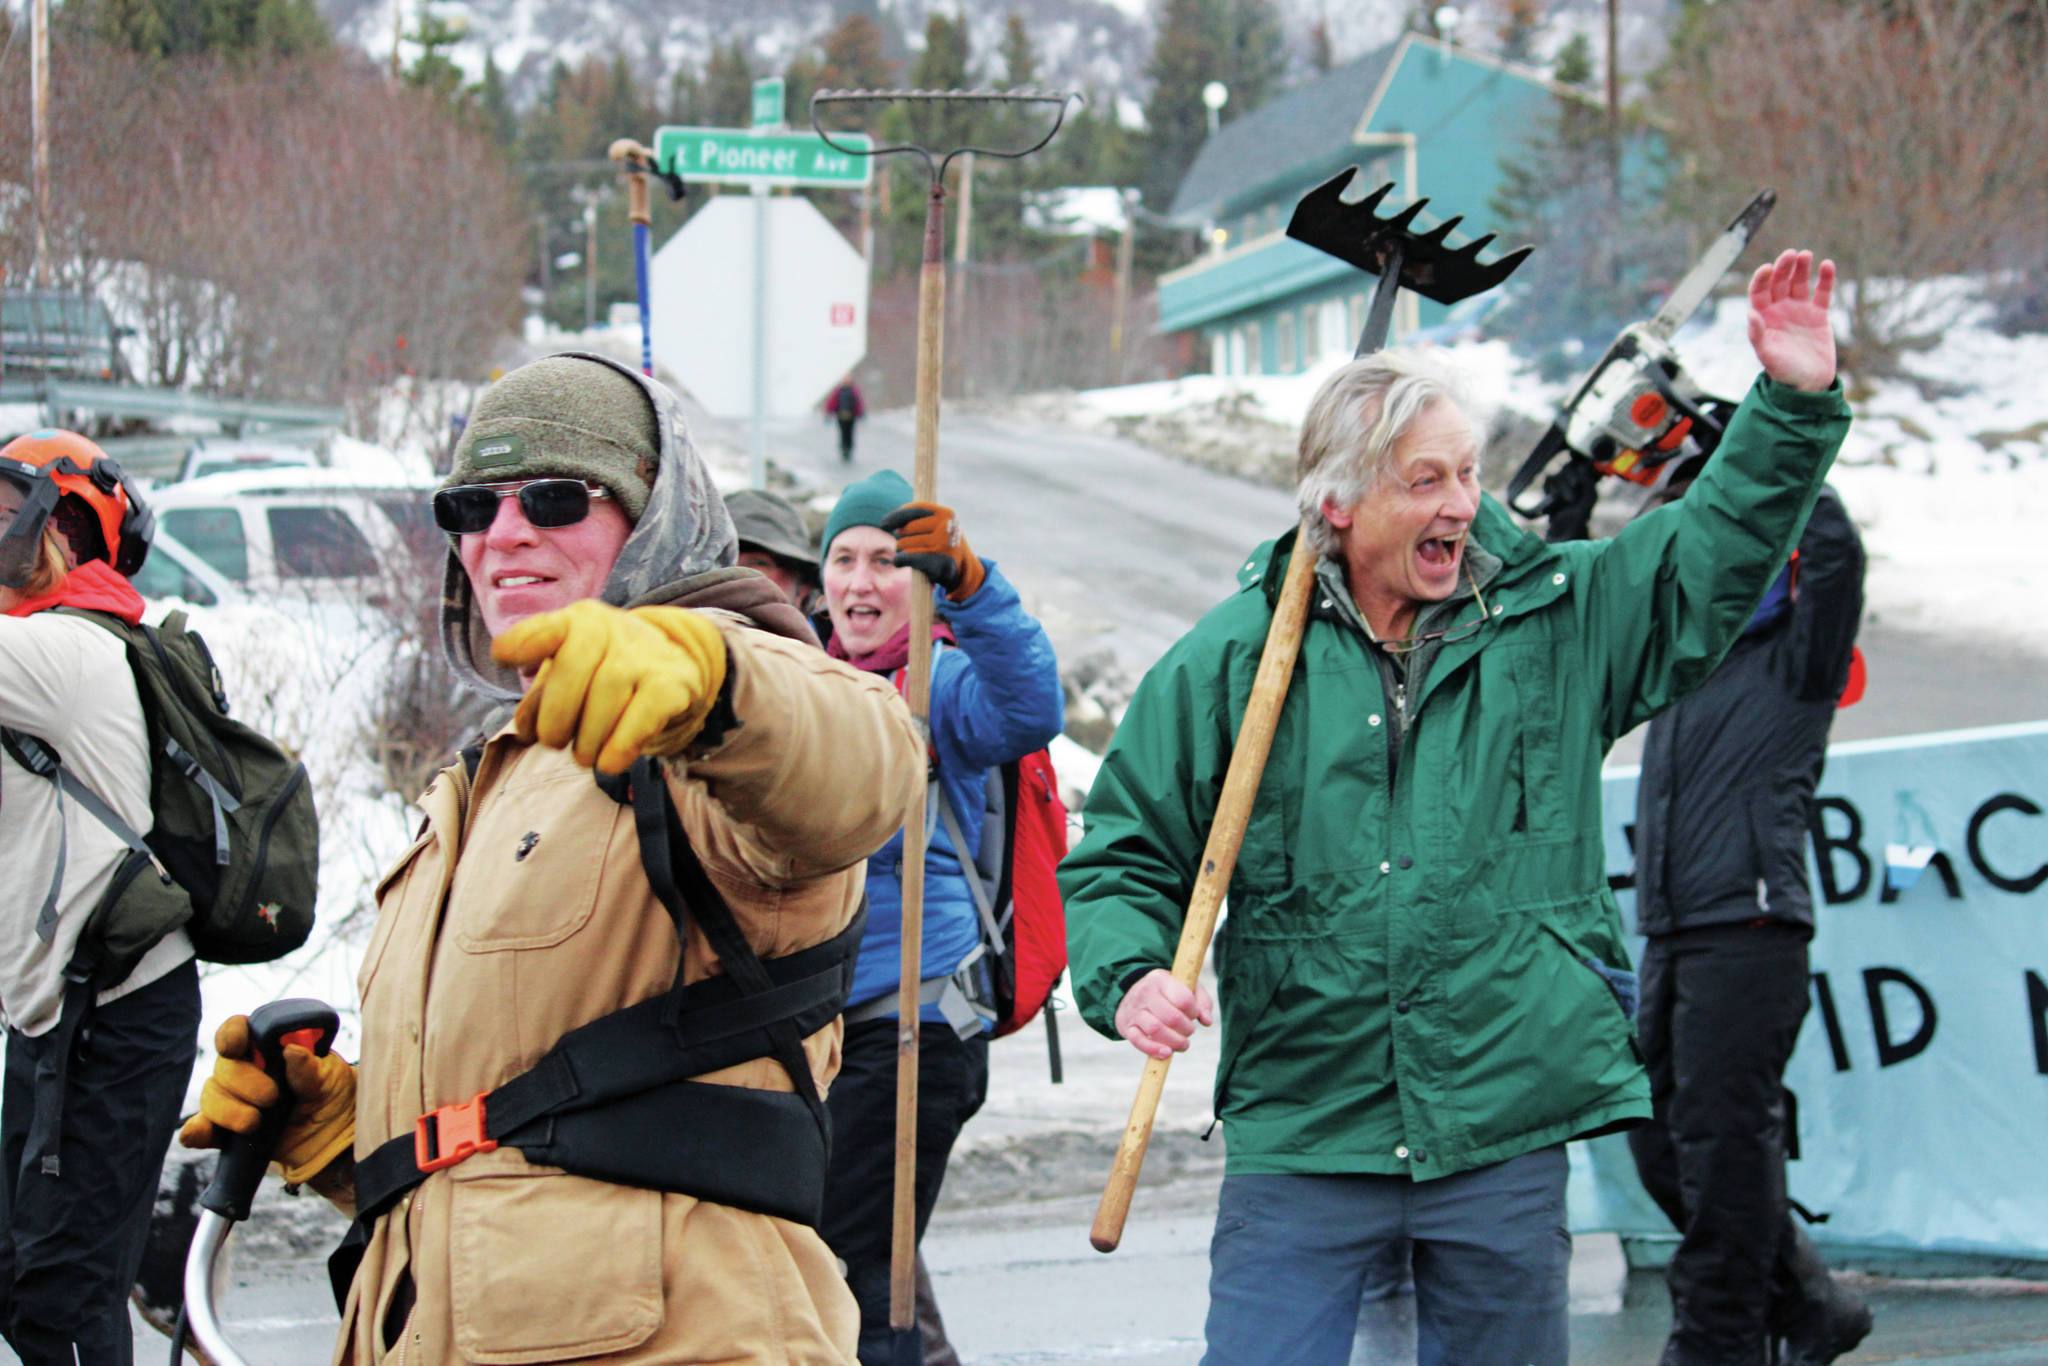 Parade participants representing trail crews who work on Kachemak Bay State Park trails march in this year’s Homer Winter Carnival parade on Saturday, Feb. 8, 2020 on Pioneer Avenue in Homer, Alaska. (Photo by Megan Pacer/Homer News)